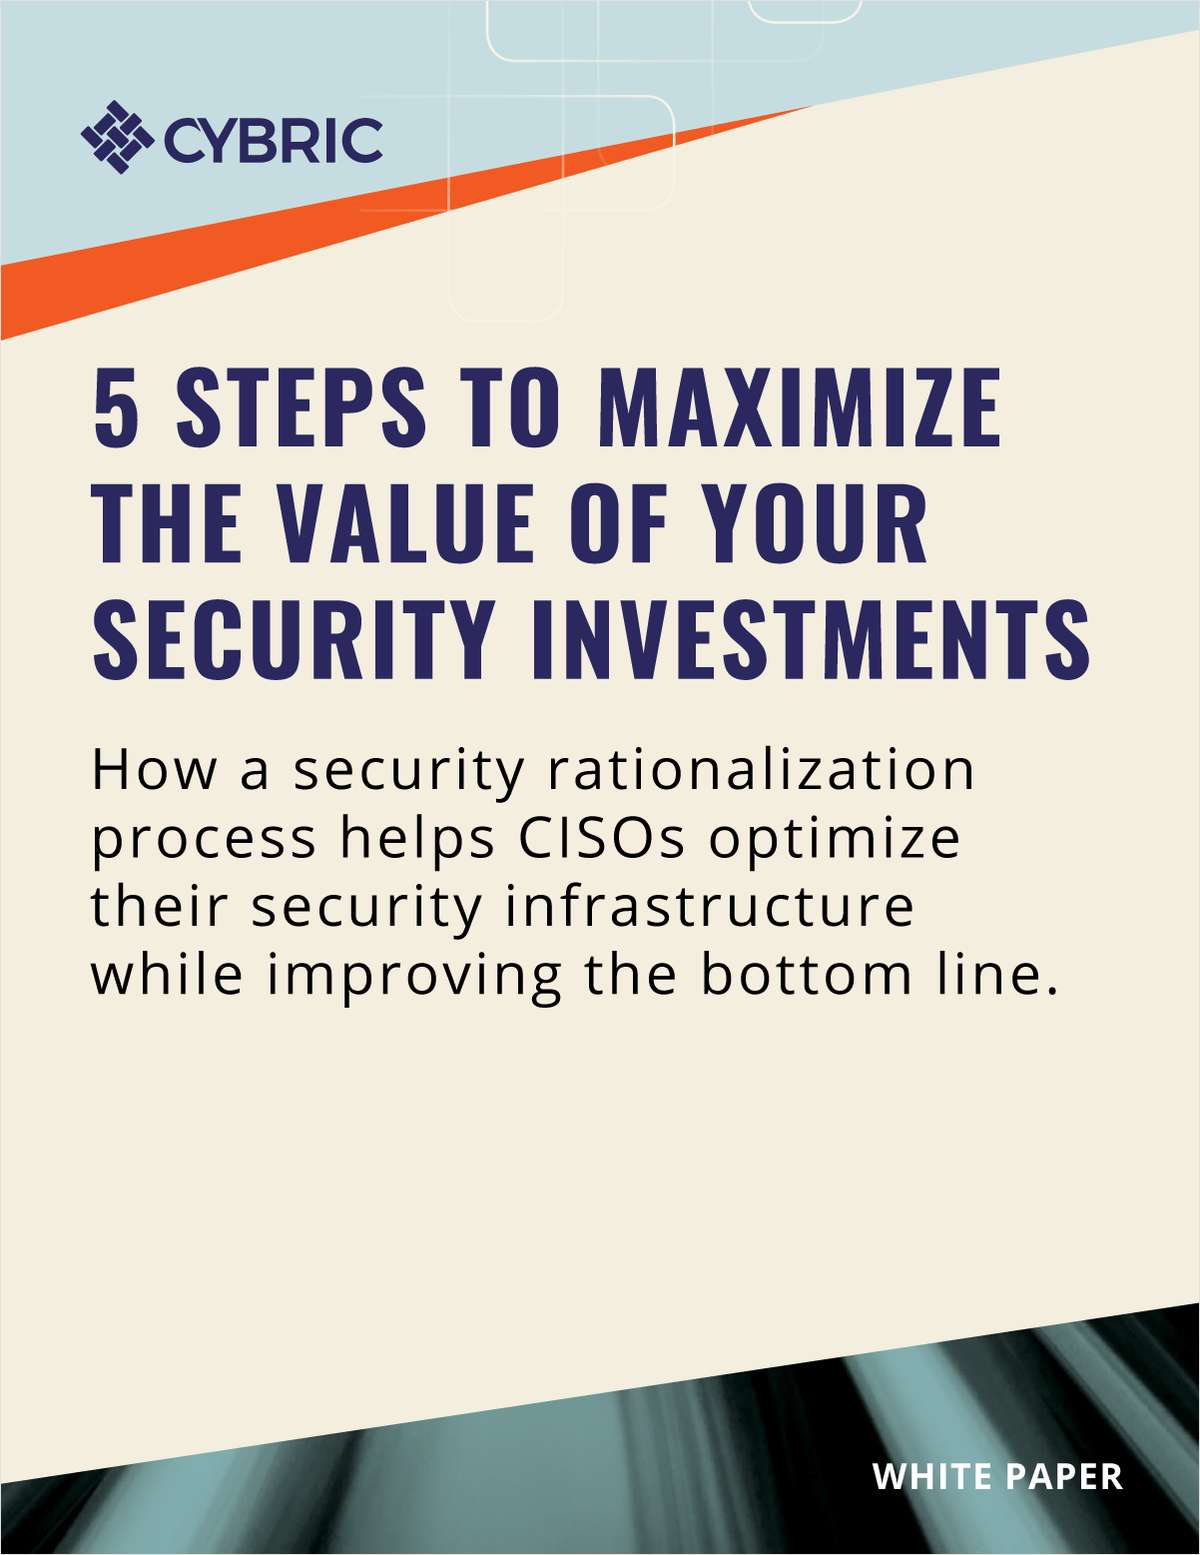 5 Steps to Maximize the Value of Your Security Investments